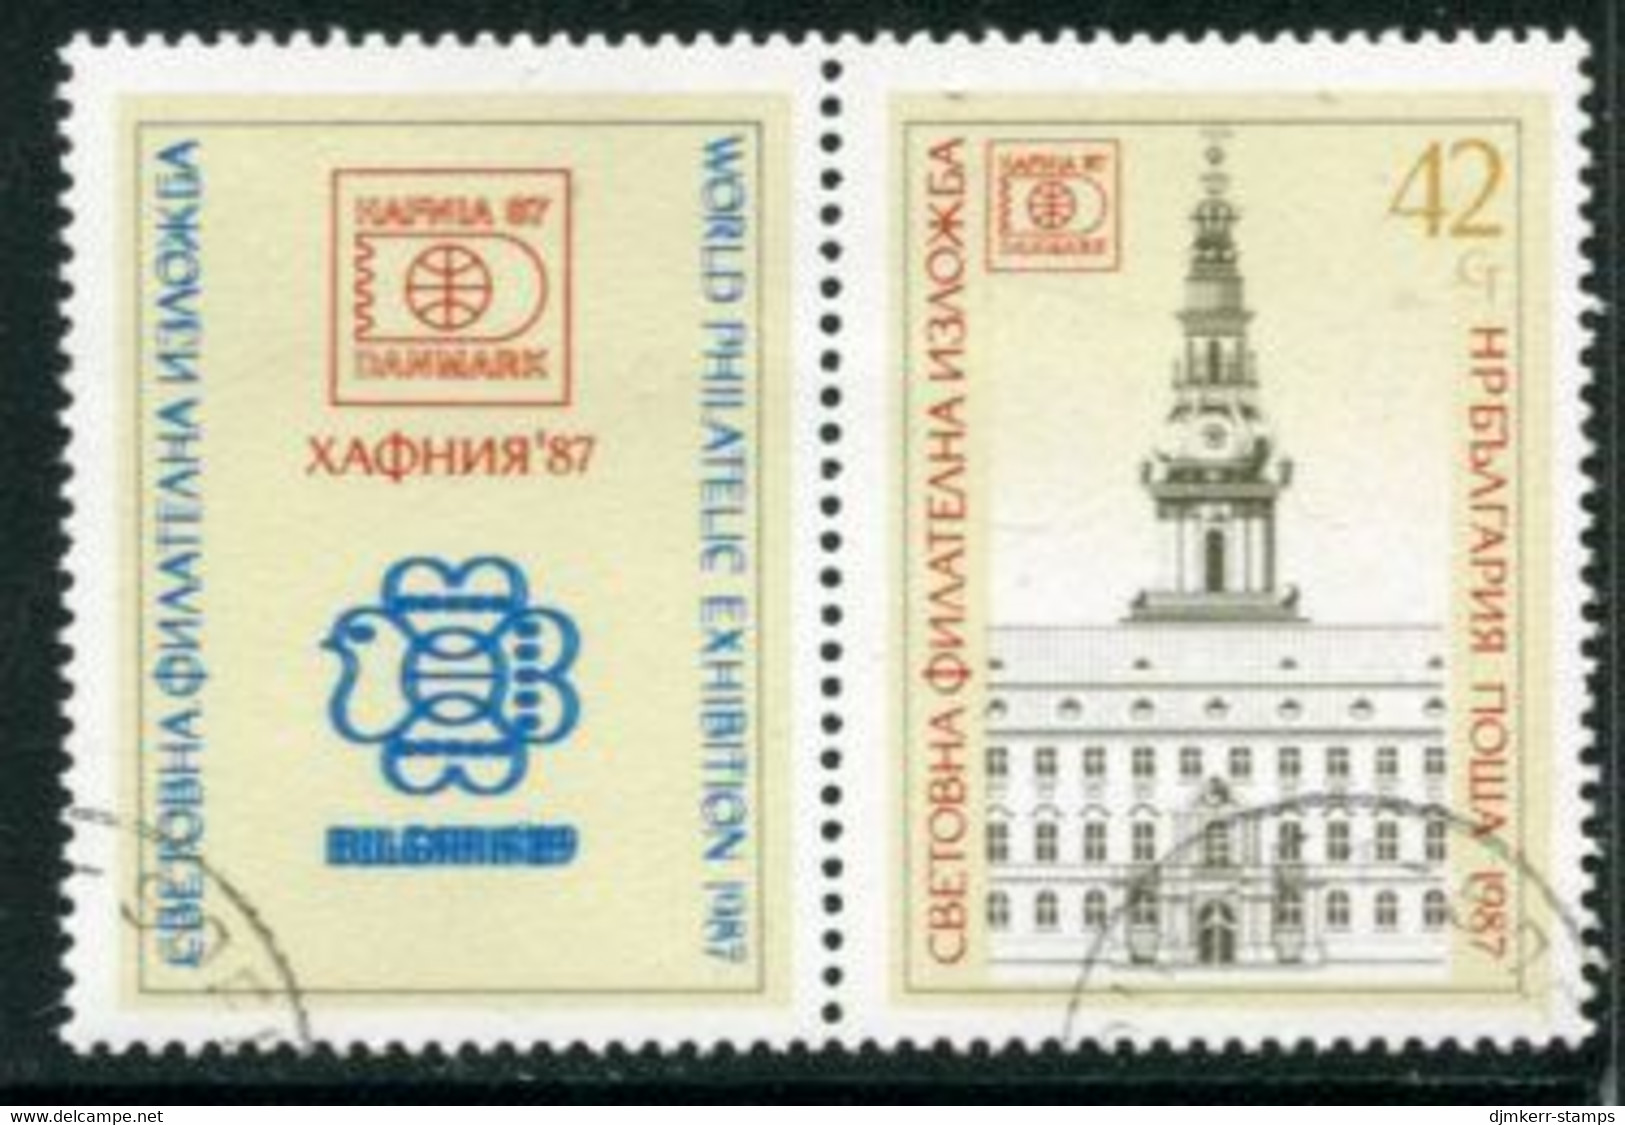 BULGARIA 1987 HAFNIA Stamp Exhibition Used.  Michel 3597 Zf - Used Stamps